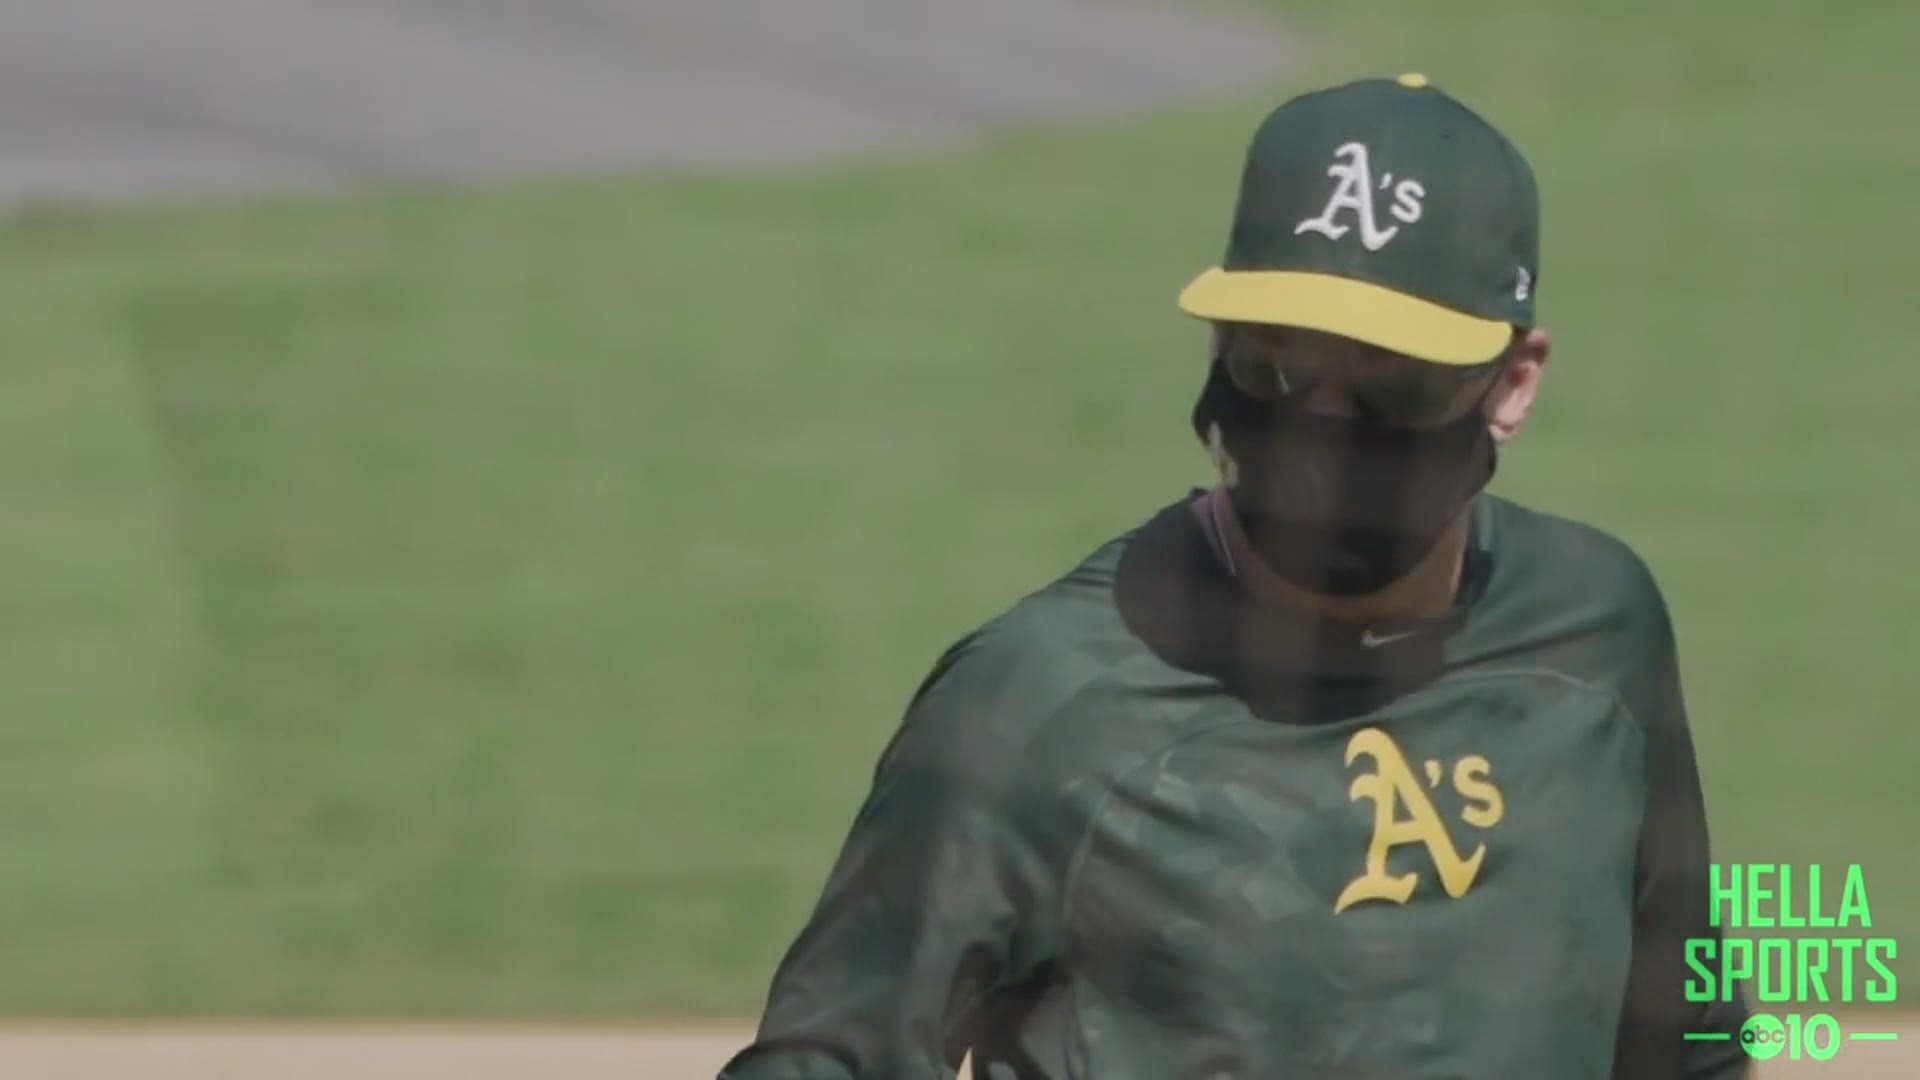 A glimpse into Monday's Oakland A's team workout at the Coliseum before opening their Wild Card playoff series with the Chicago White Sox on Tuesday.